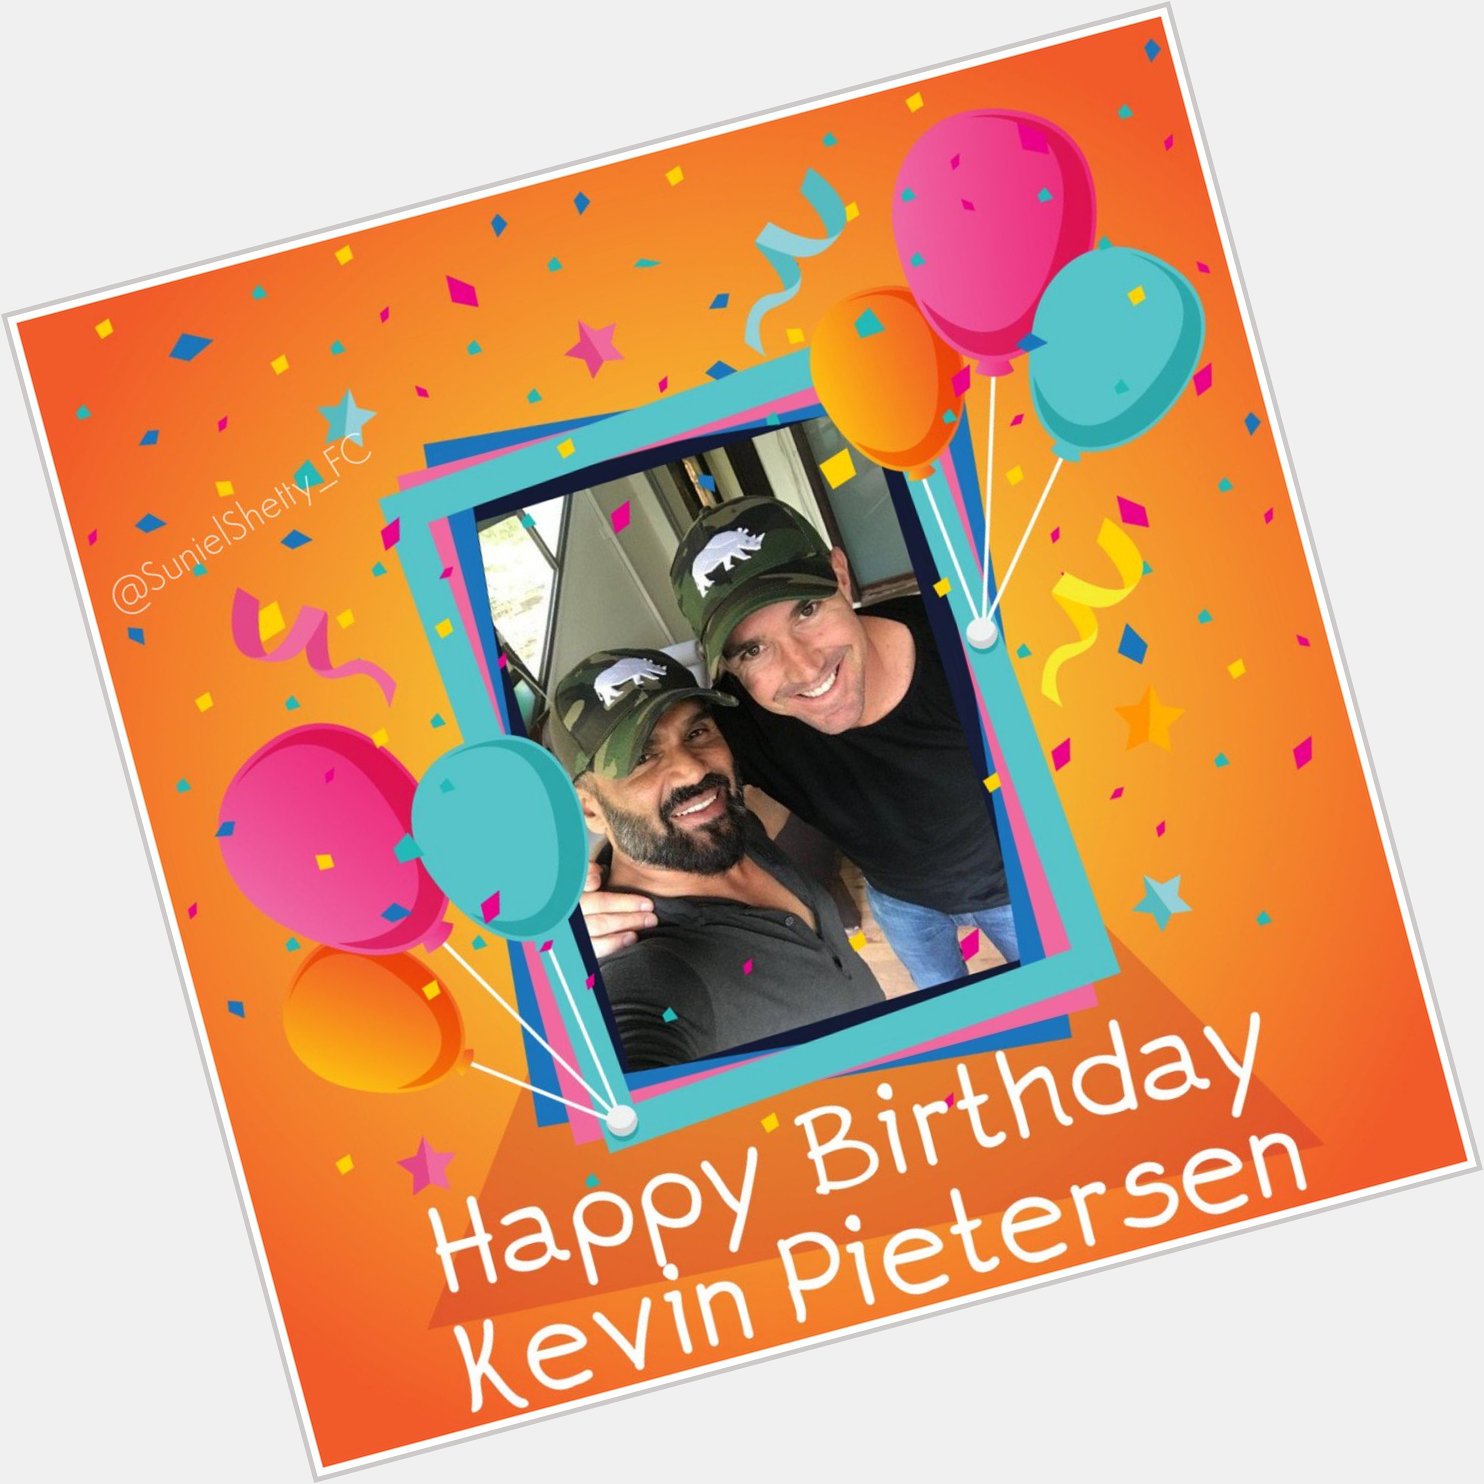 Wishes a very happy birthday to KP Kevin Pietersen ..   